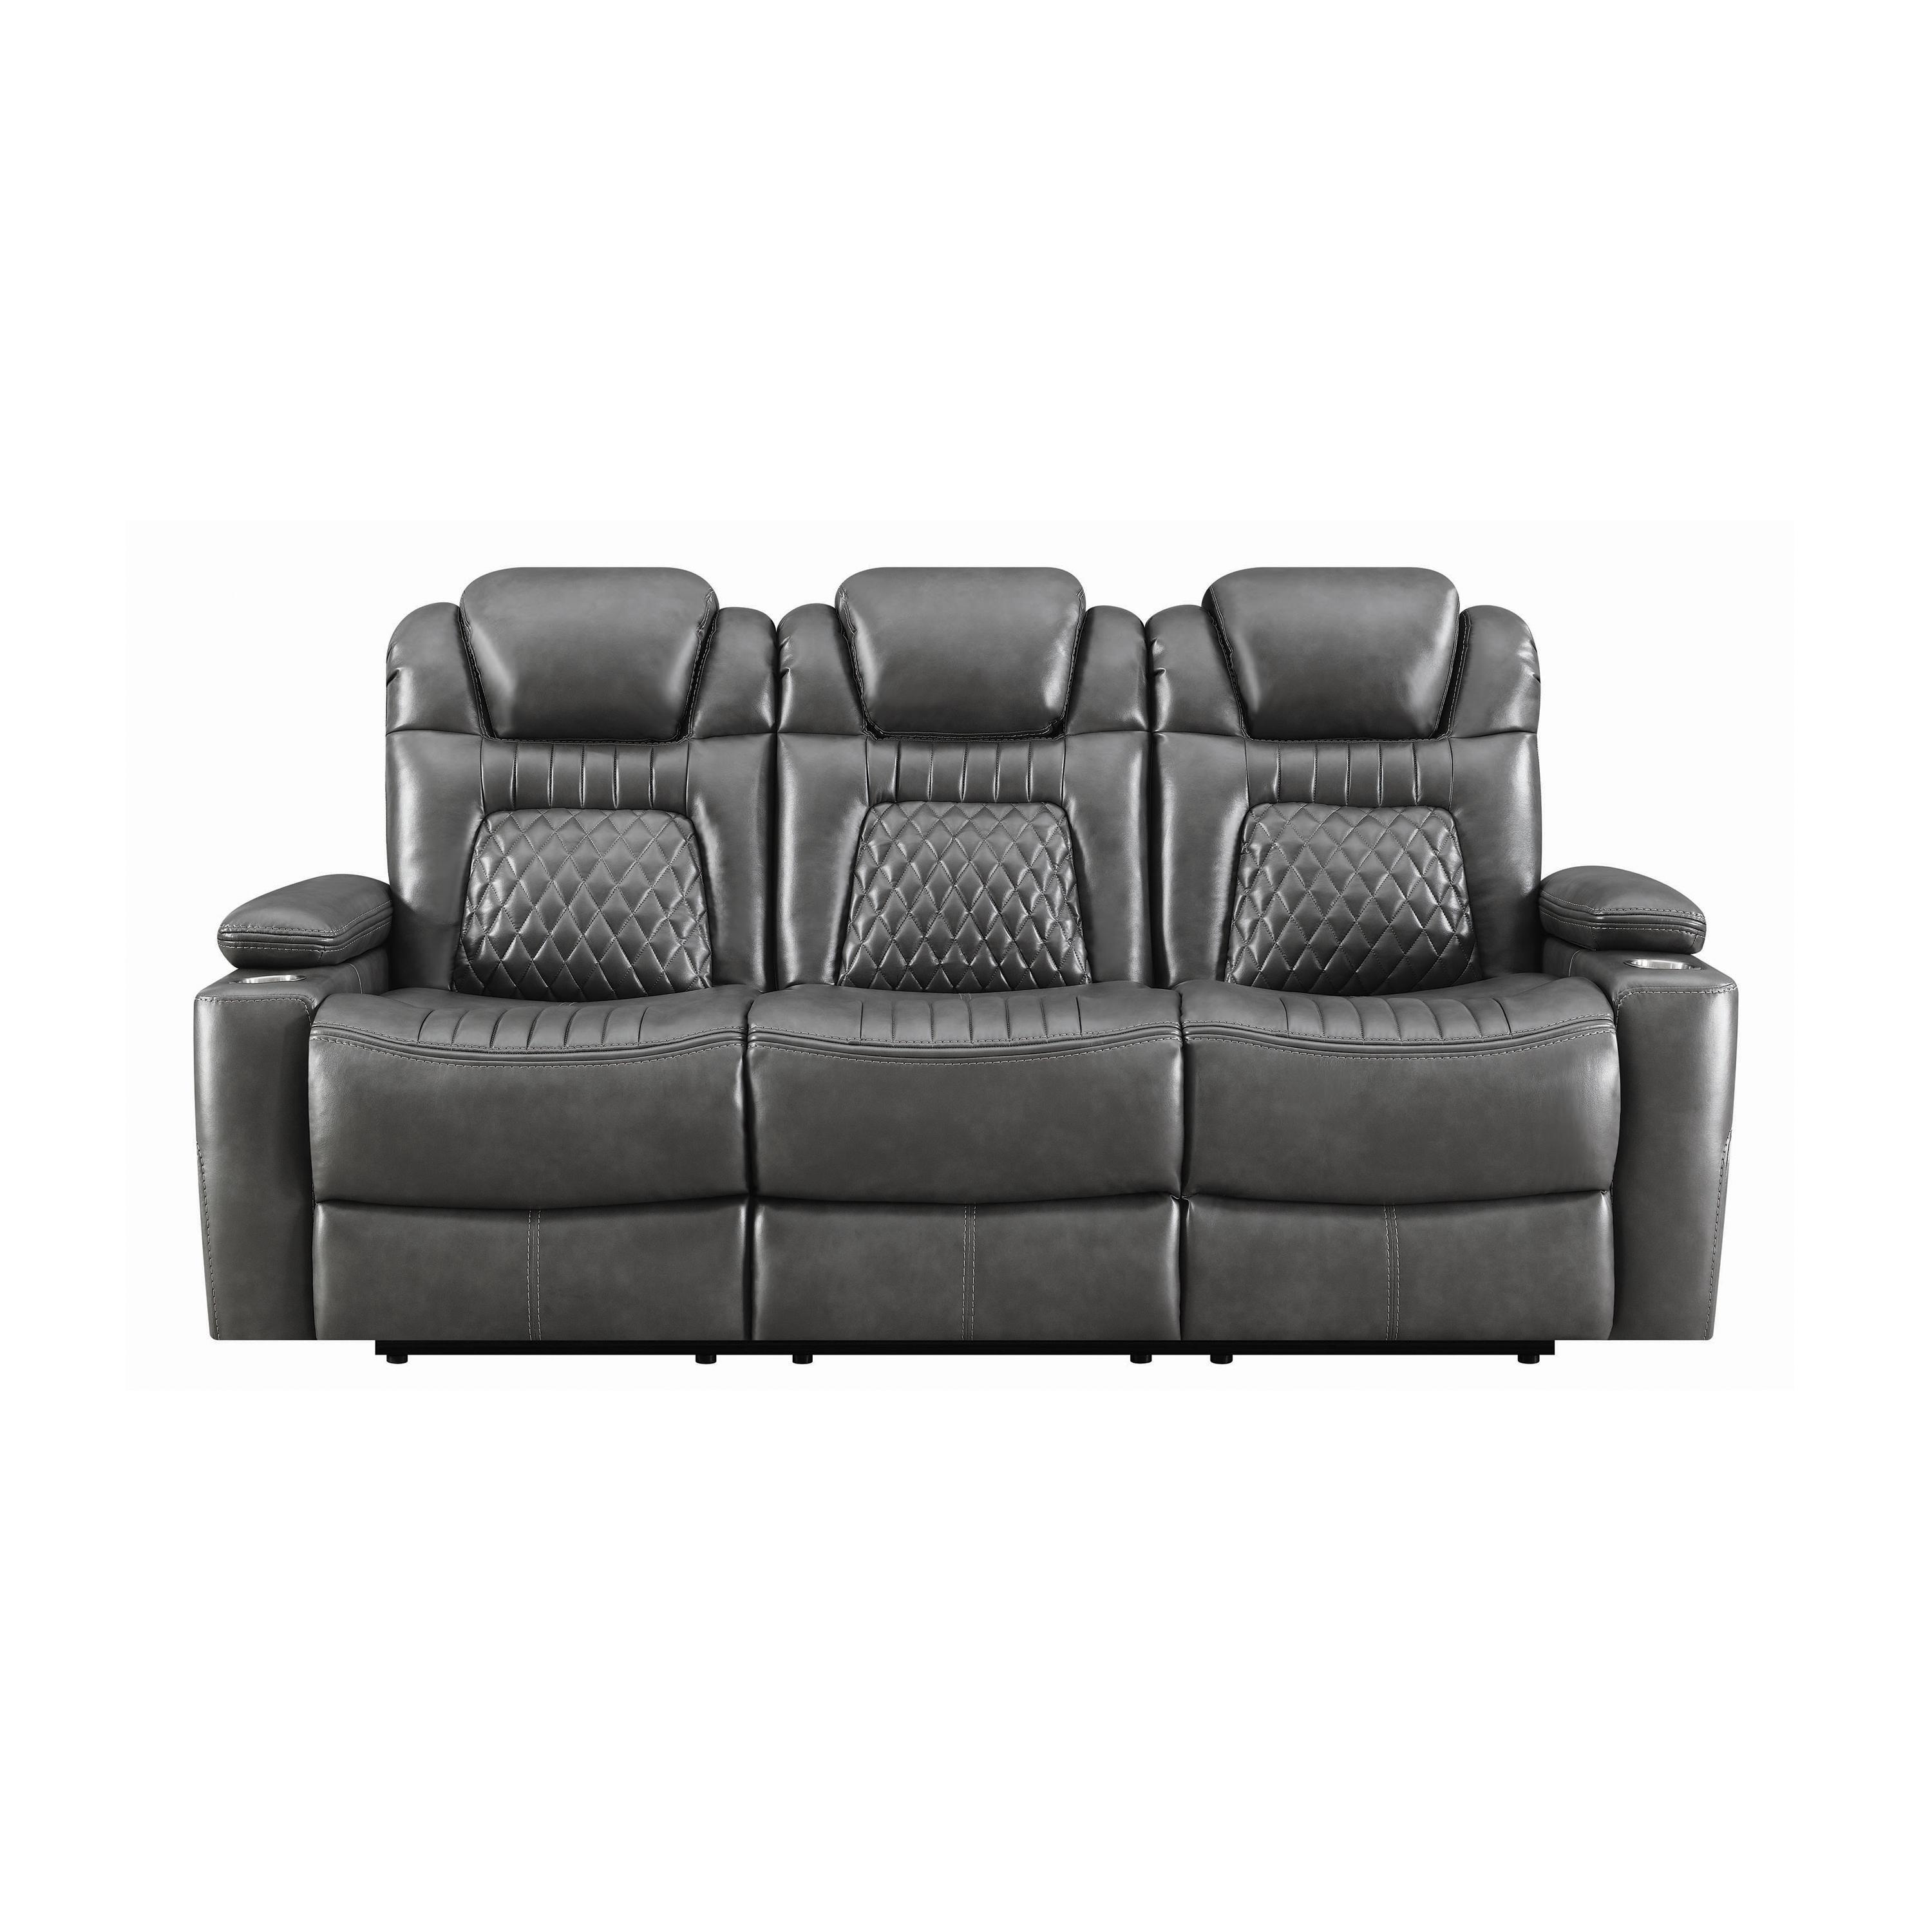 Transitional Power sofa 603414PP Korbach 603414PP in Charcoal 